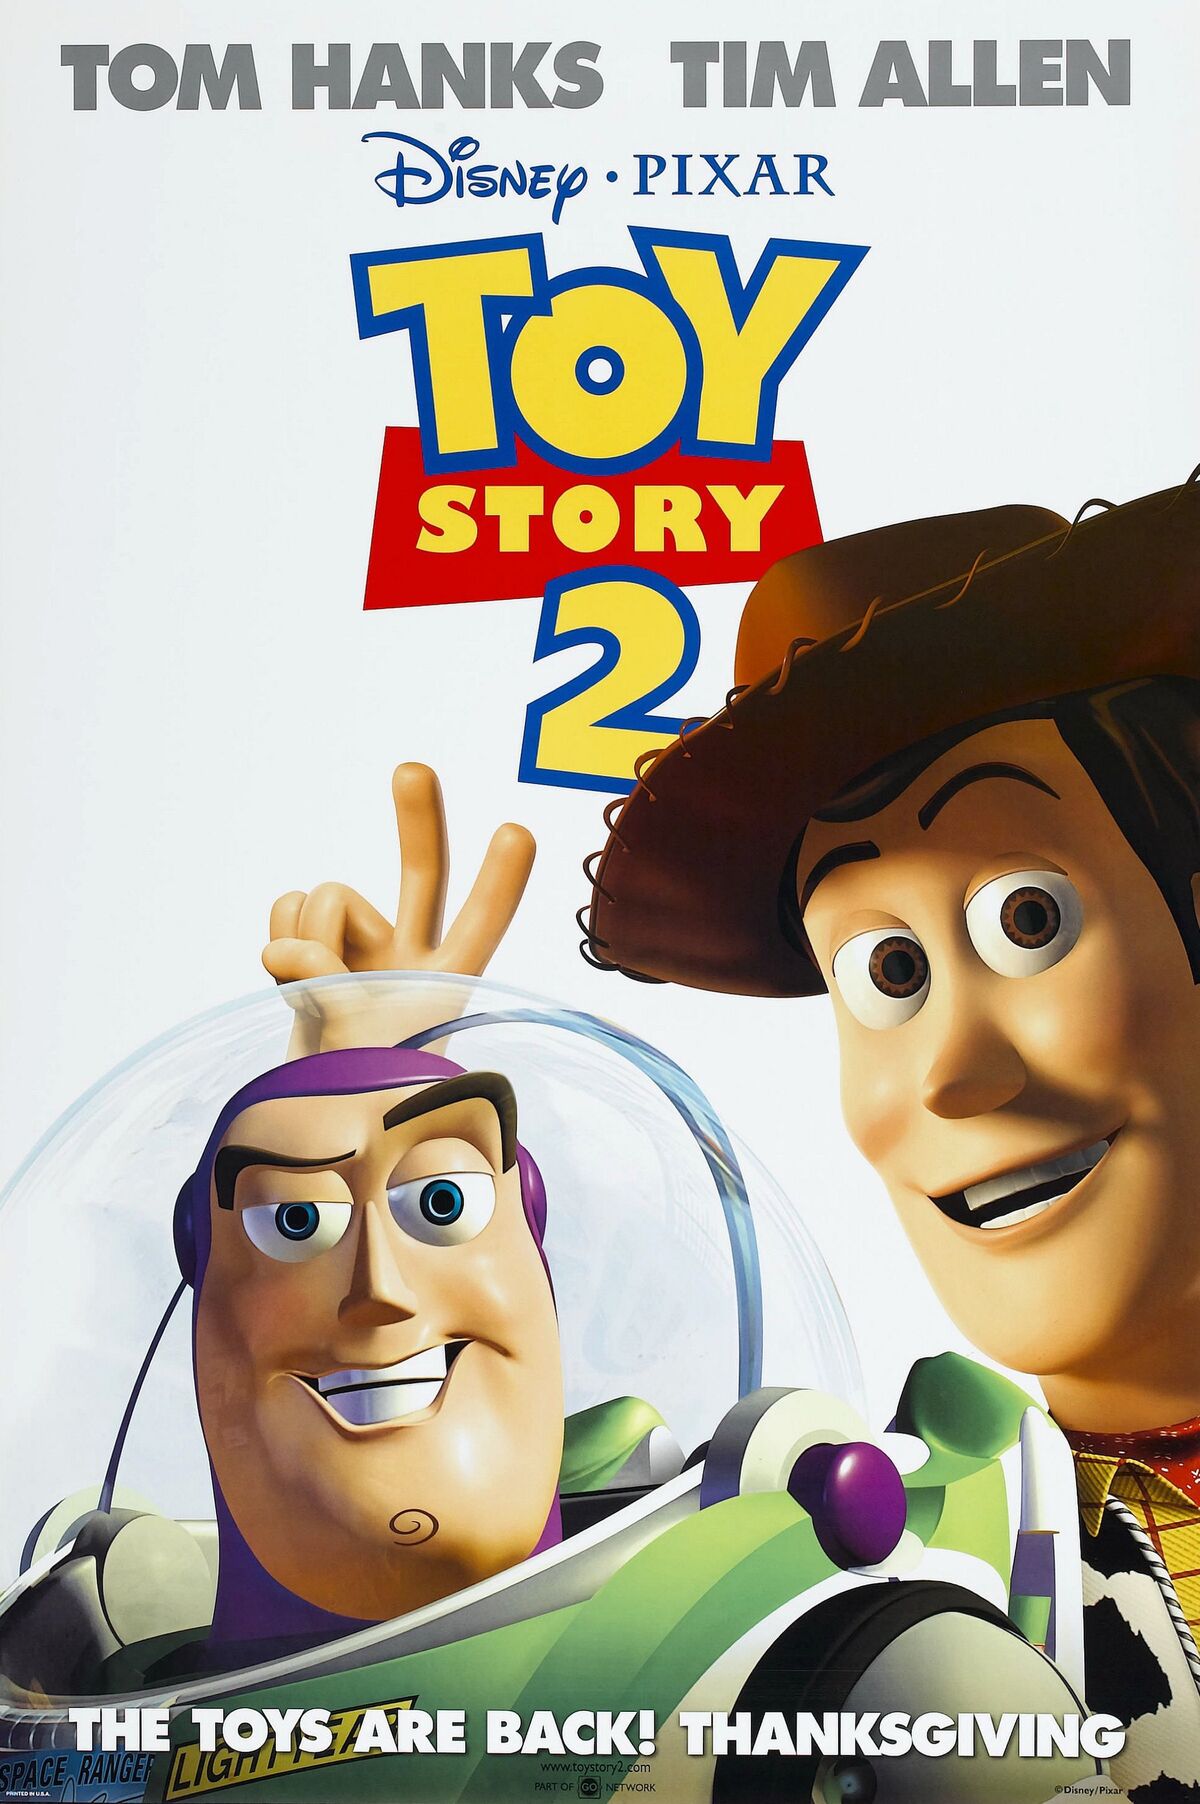 Pixar Review 9: Toy Story 2